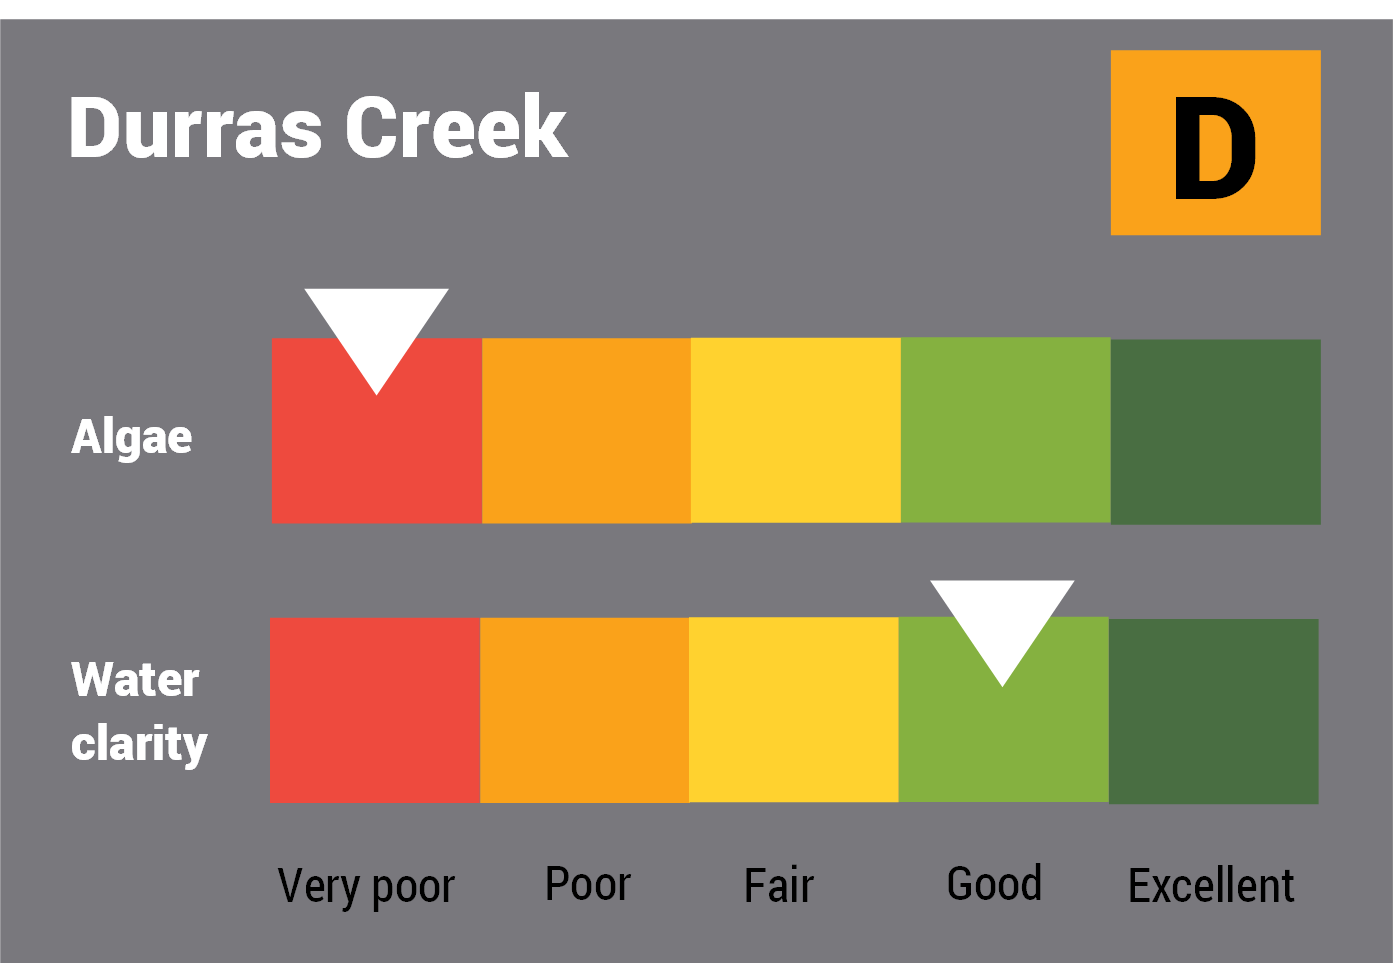 Durras Creek water quality report card for algae and water clarity showing colour-coded ratings (red, orange, yellow, light green and dark green, which represent very poor, poor, fair, good and excellent, respectively). Algae is rated 'good' and water clarity is rated 'very poor' giving an overall rating of 'poor' or 'D'.